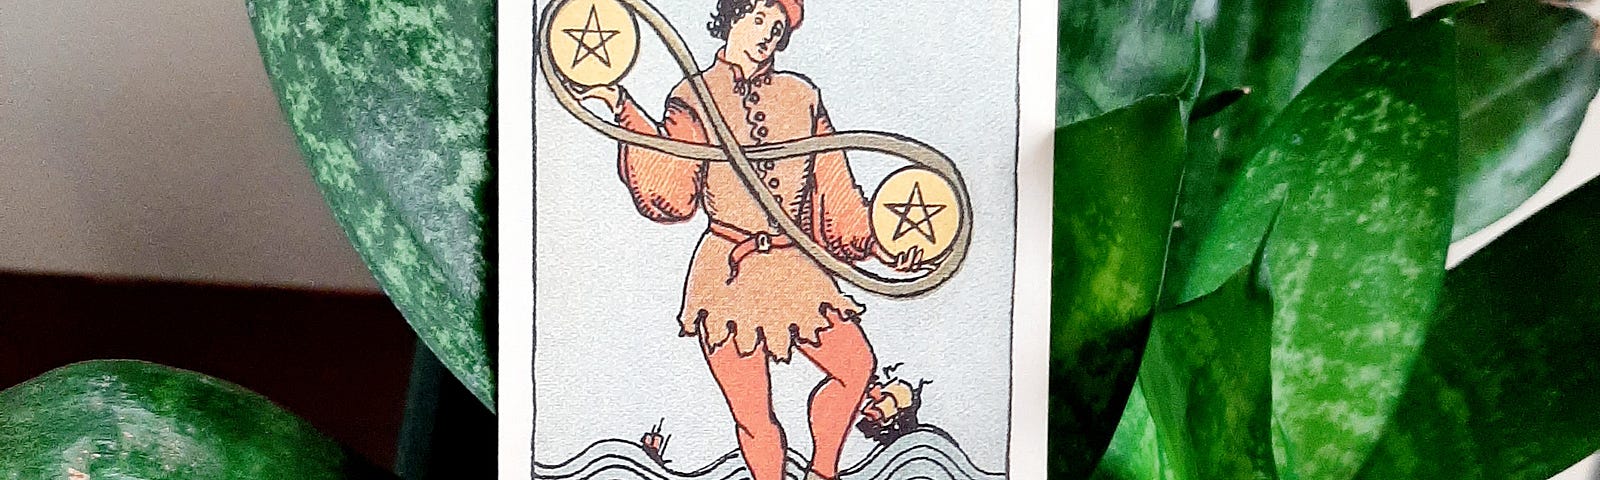 A man stands on one leg juggling two pentacle coins which are bound by an infinity loop. Boats sail on choppy waters behind him.